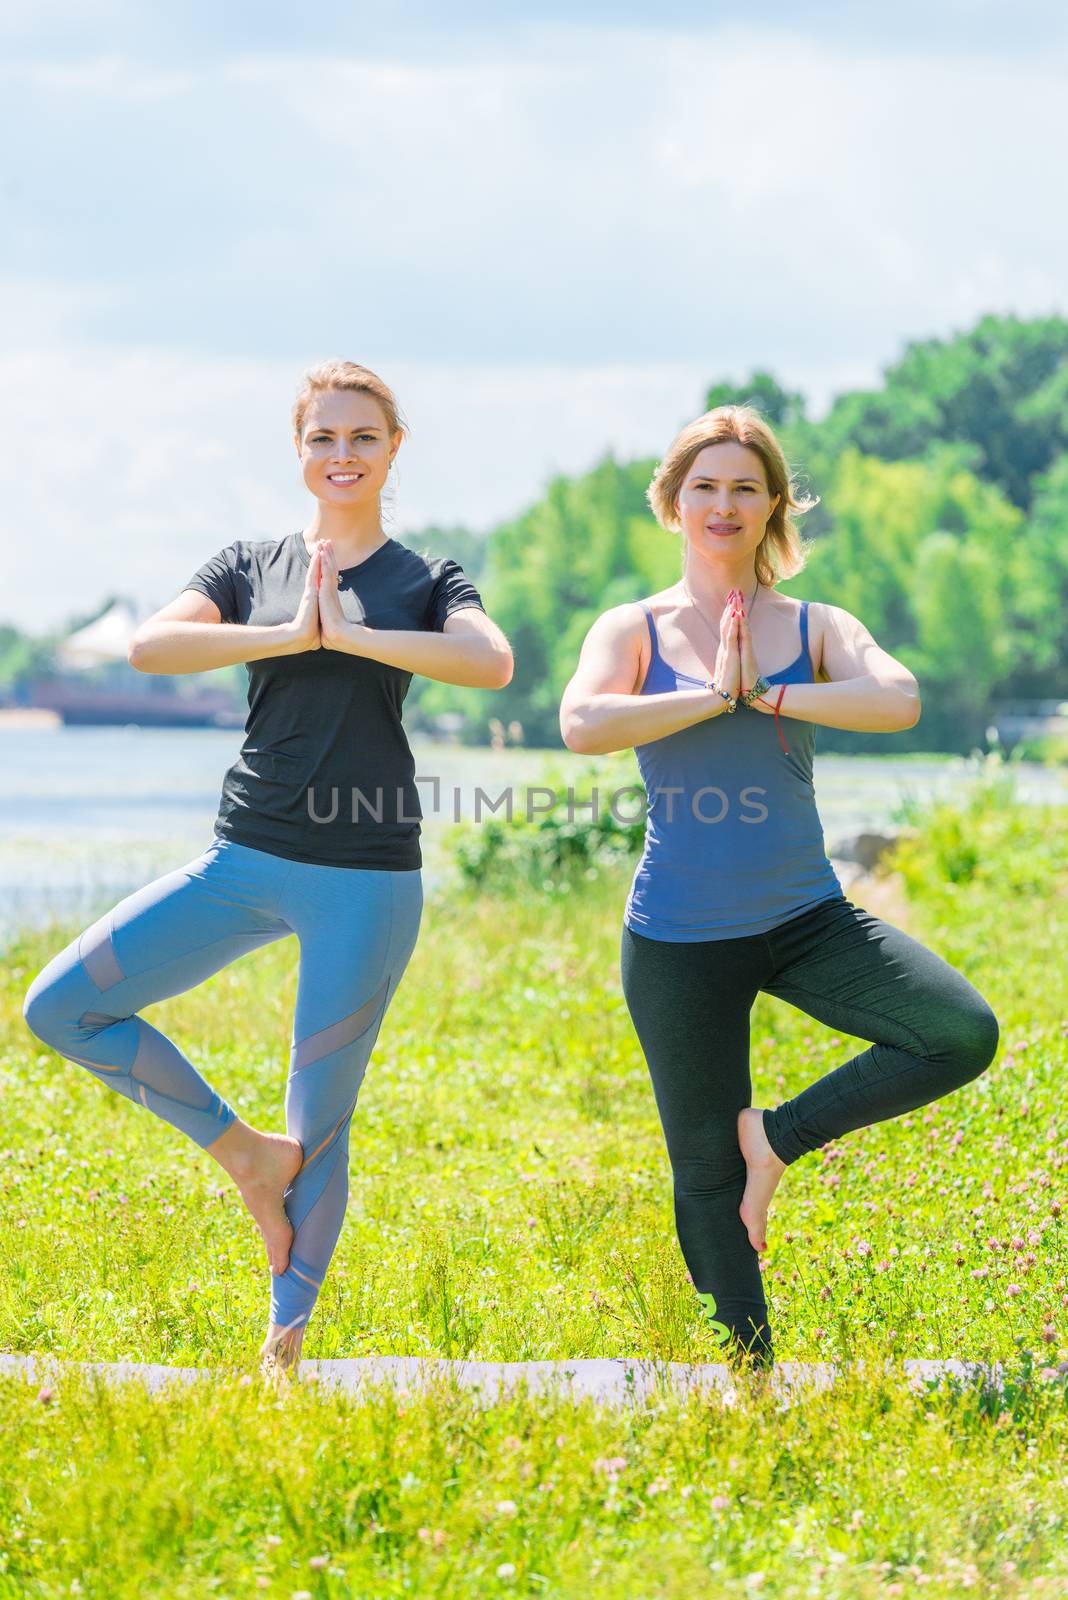 yoga classes with an individual trainer, balance on one leg on a by kosmsos111